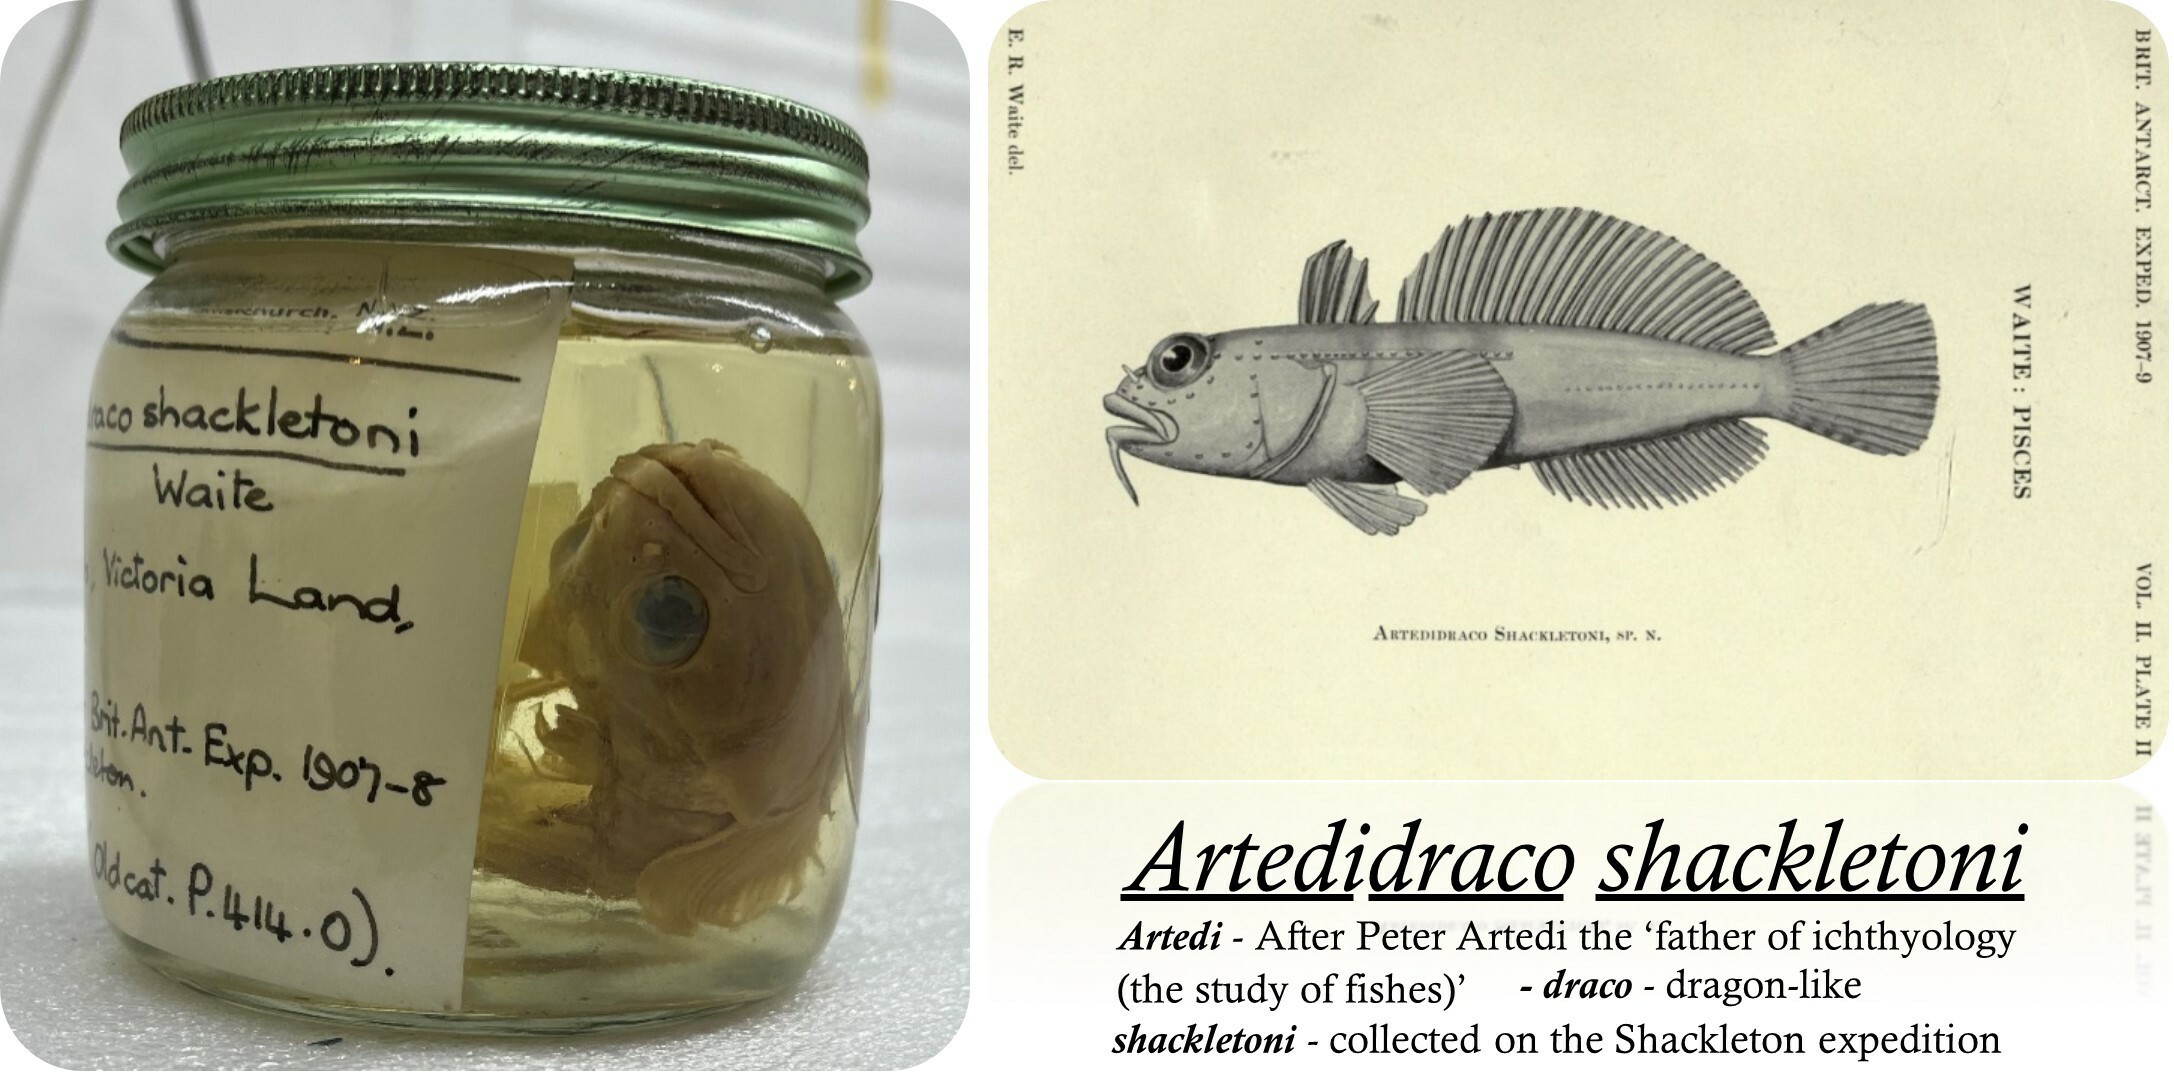 The holotype of the fish species Artedidraco shackletoni collected on Shackleton’s Antarctic expedition from 1907–1909 (left) and E R Waite’s original drawing of the same specimen used to describe it as a new species in 1910 at Canterbury Museum. Canterbury Museum F208